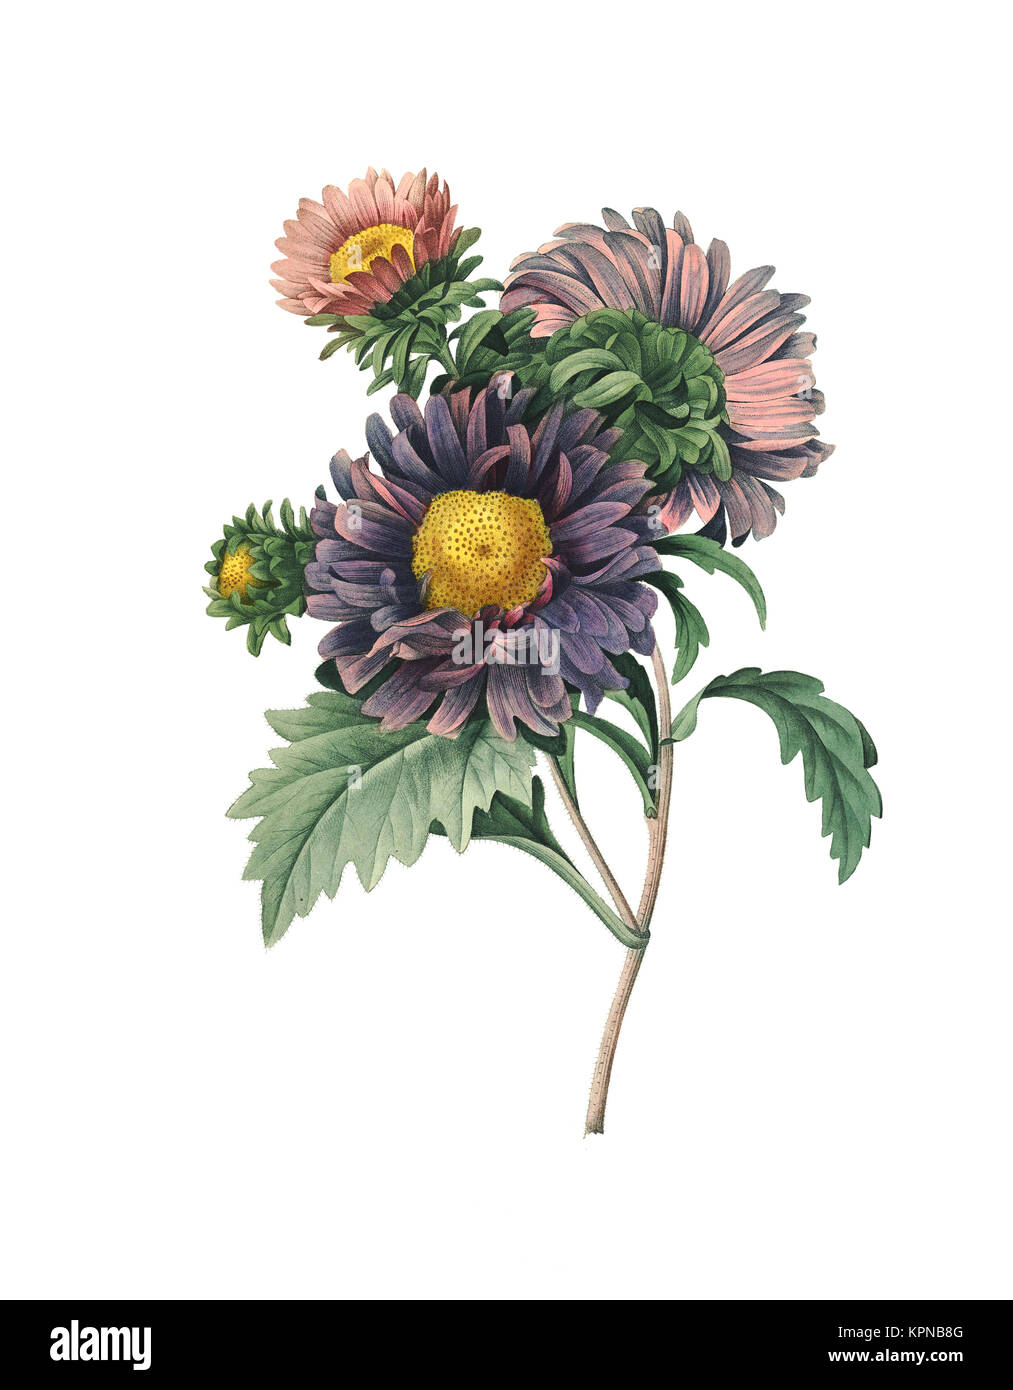 19th-century illustration of a chinese aster. Engraving by Pierre-Joseph Redoute. Published in Choix Des Plus Belles Fleurs, Paris (1827). Stock Photo